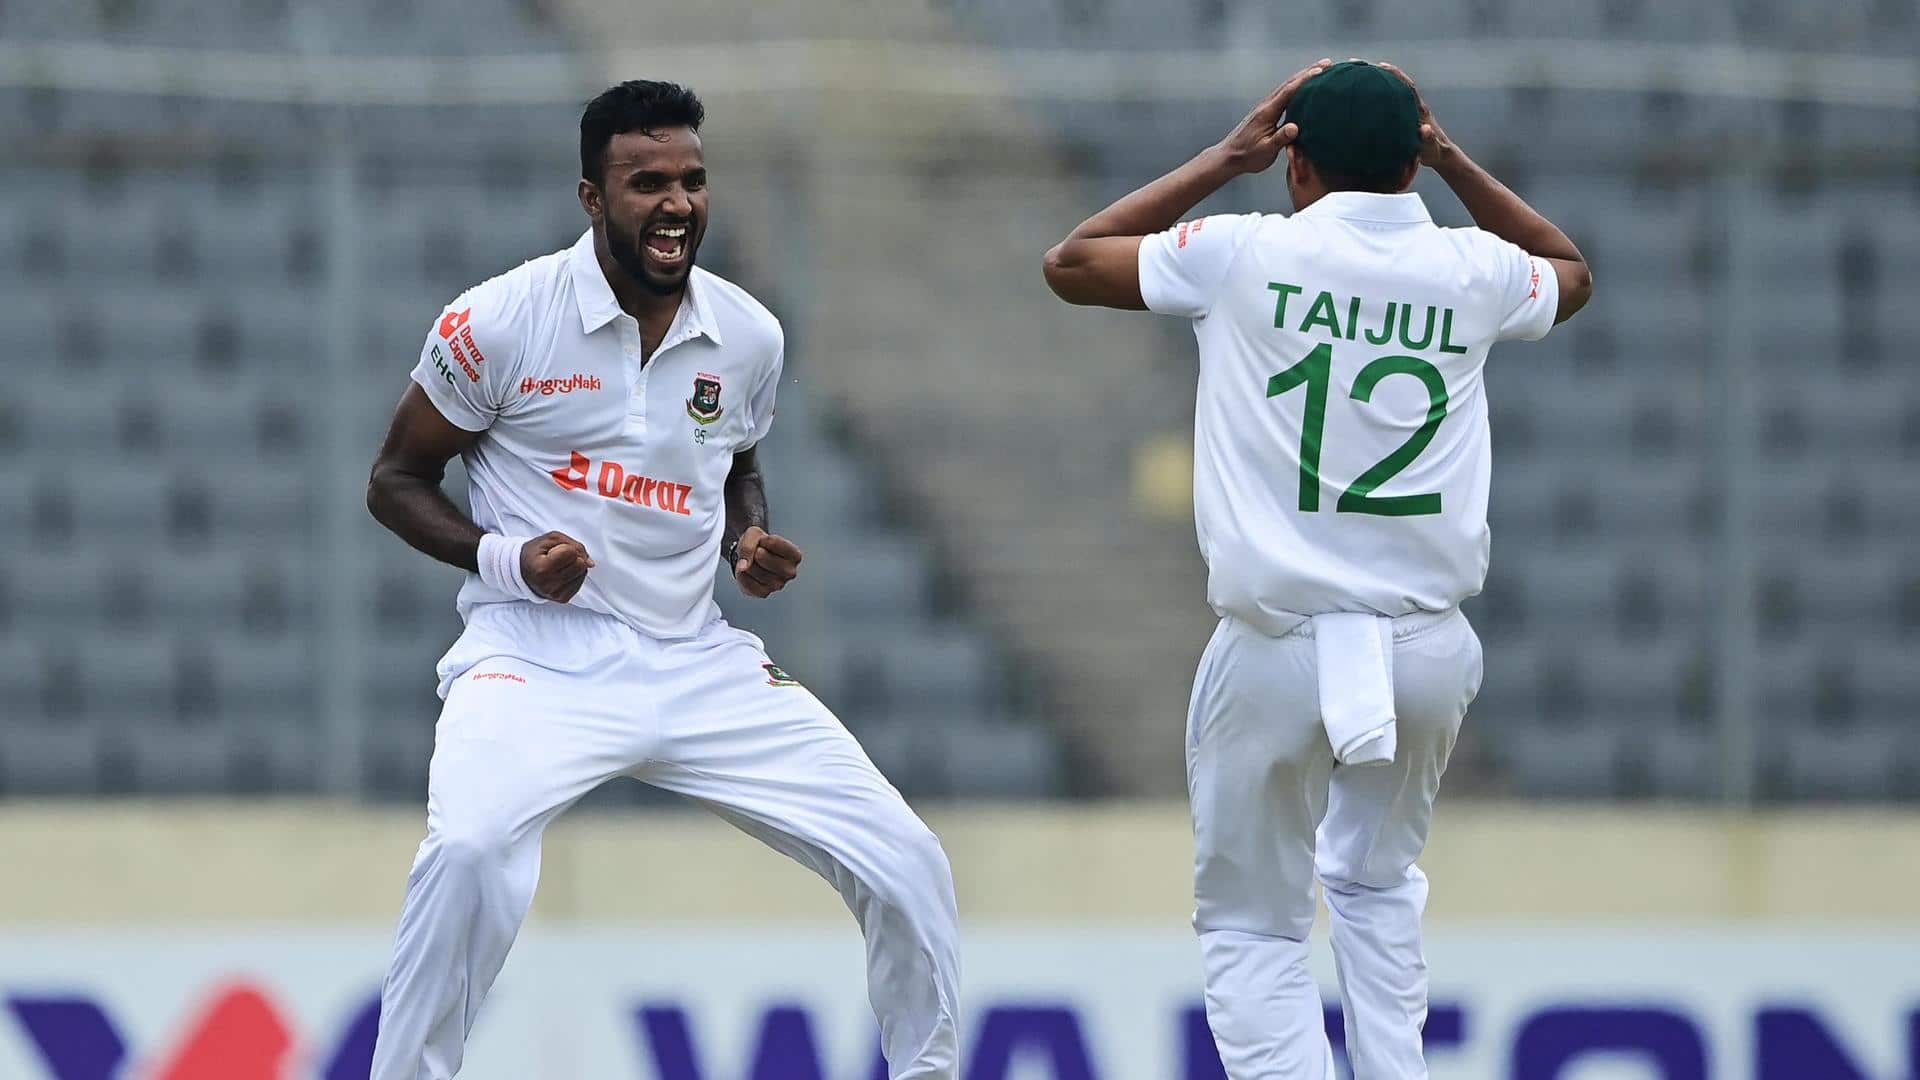 Ebadot Hossain records brilliant four-wicket haul against Afghanistan: Stats